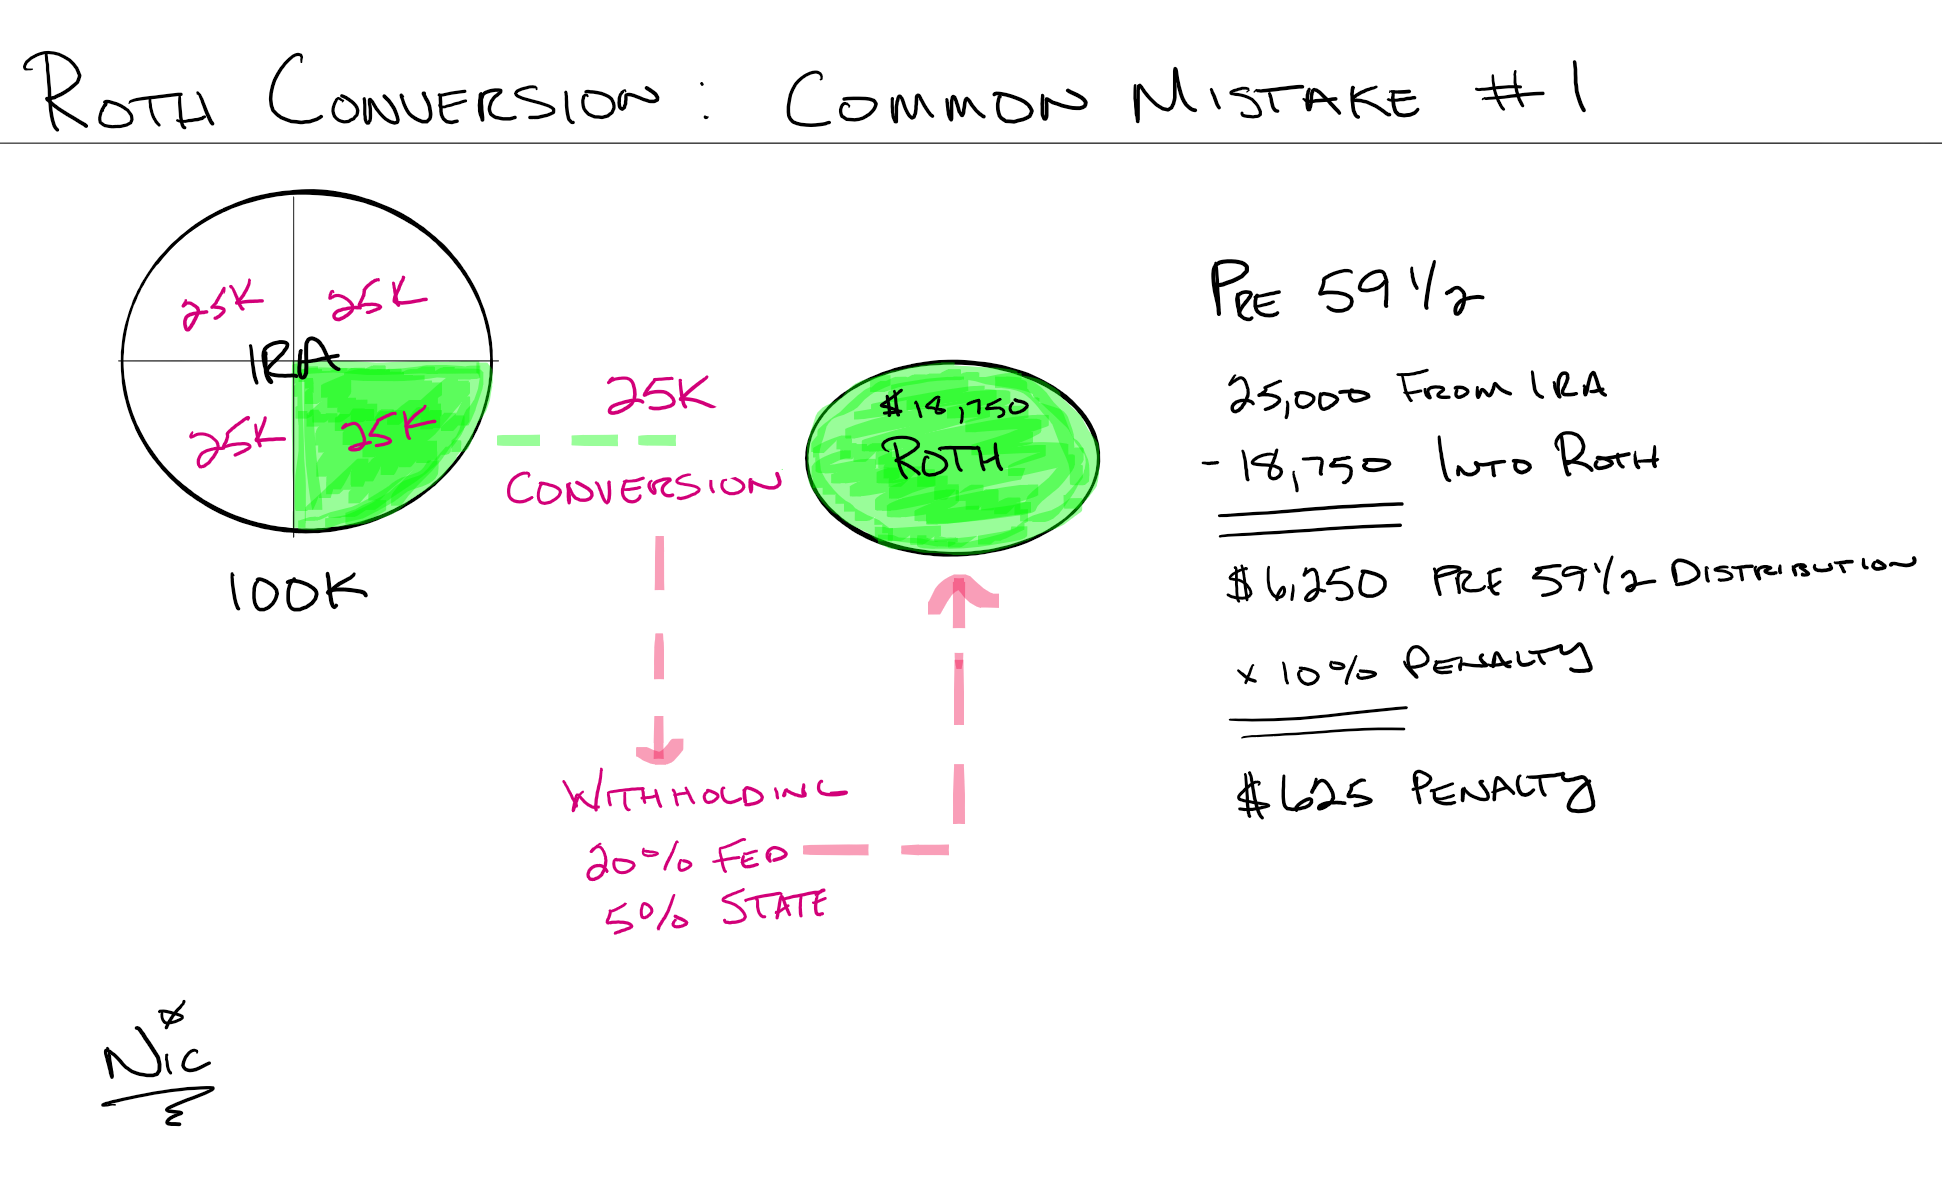 roth conversion mistake